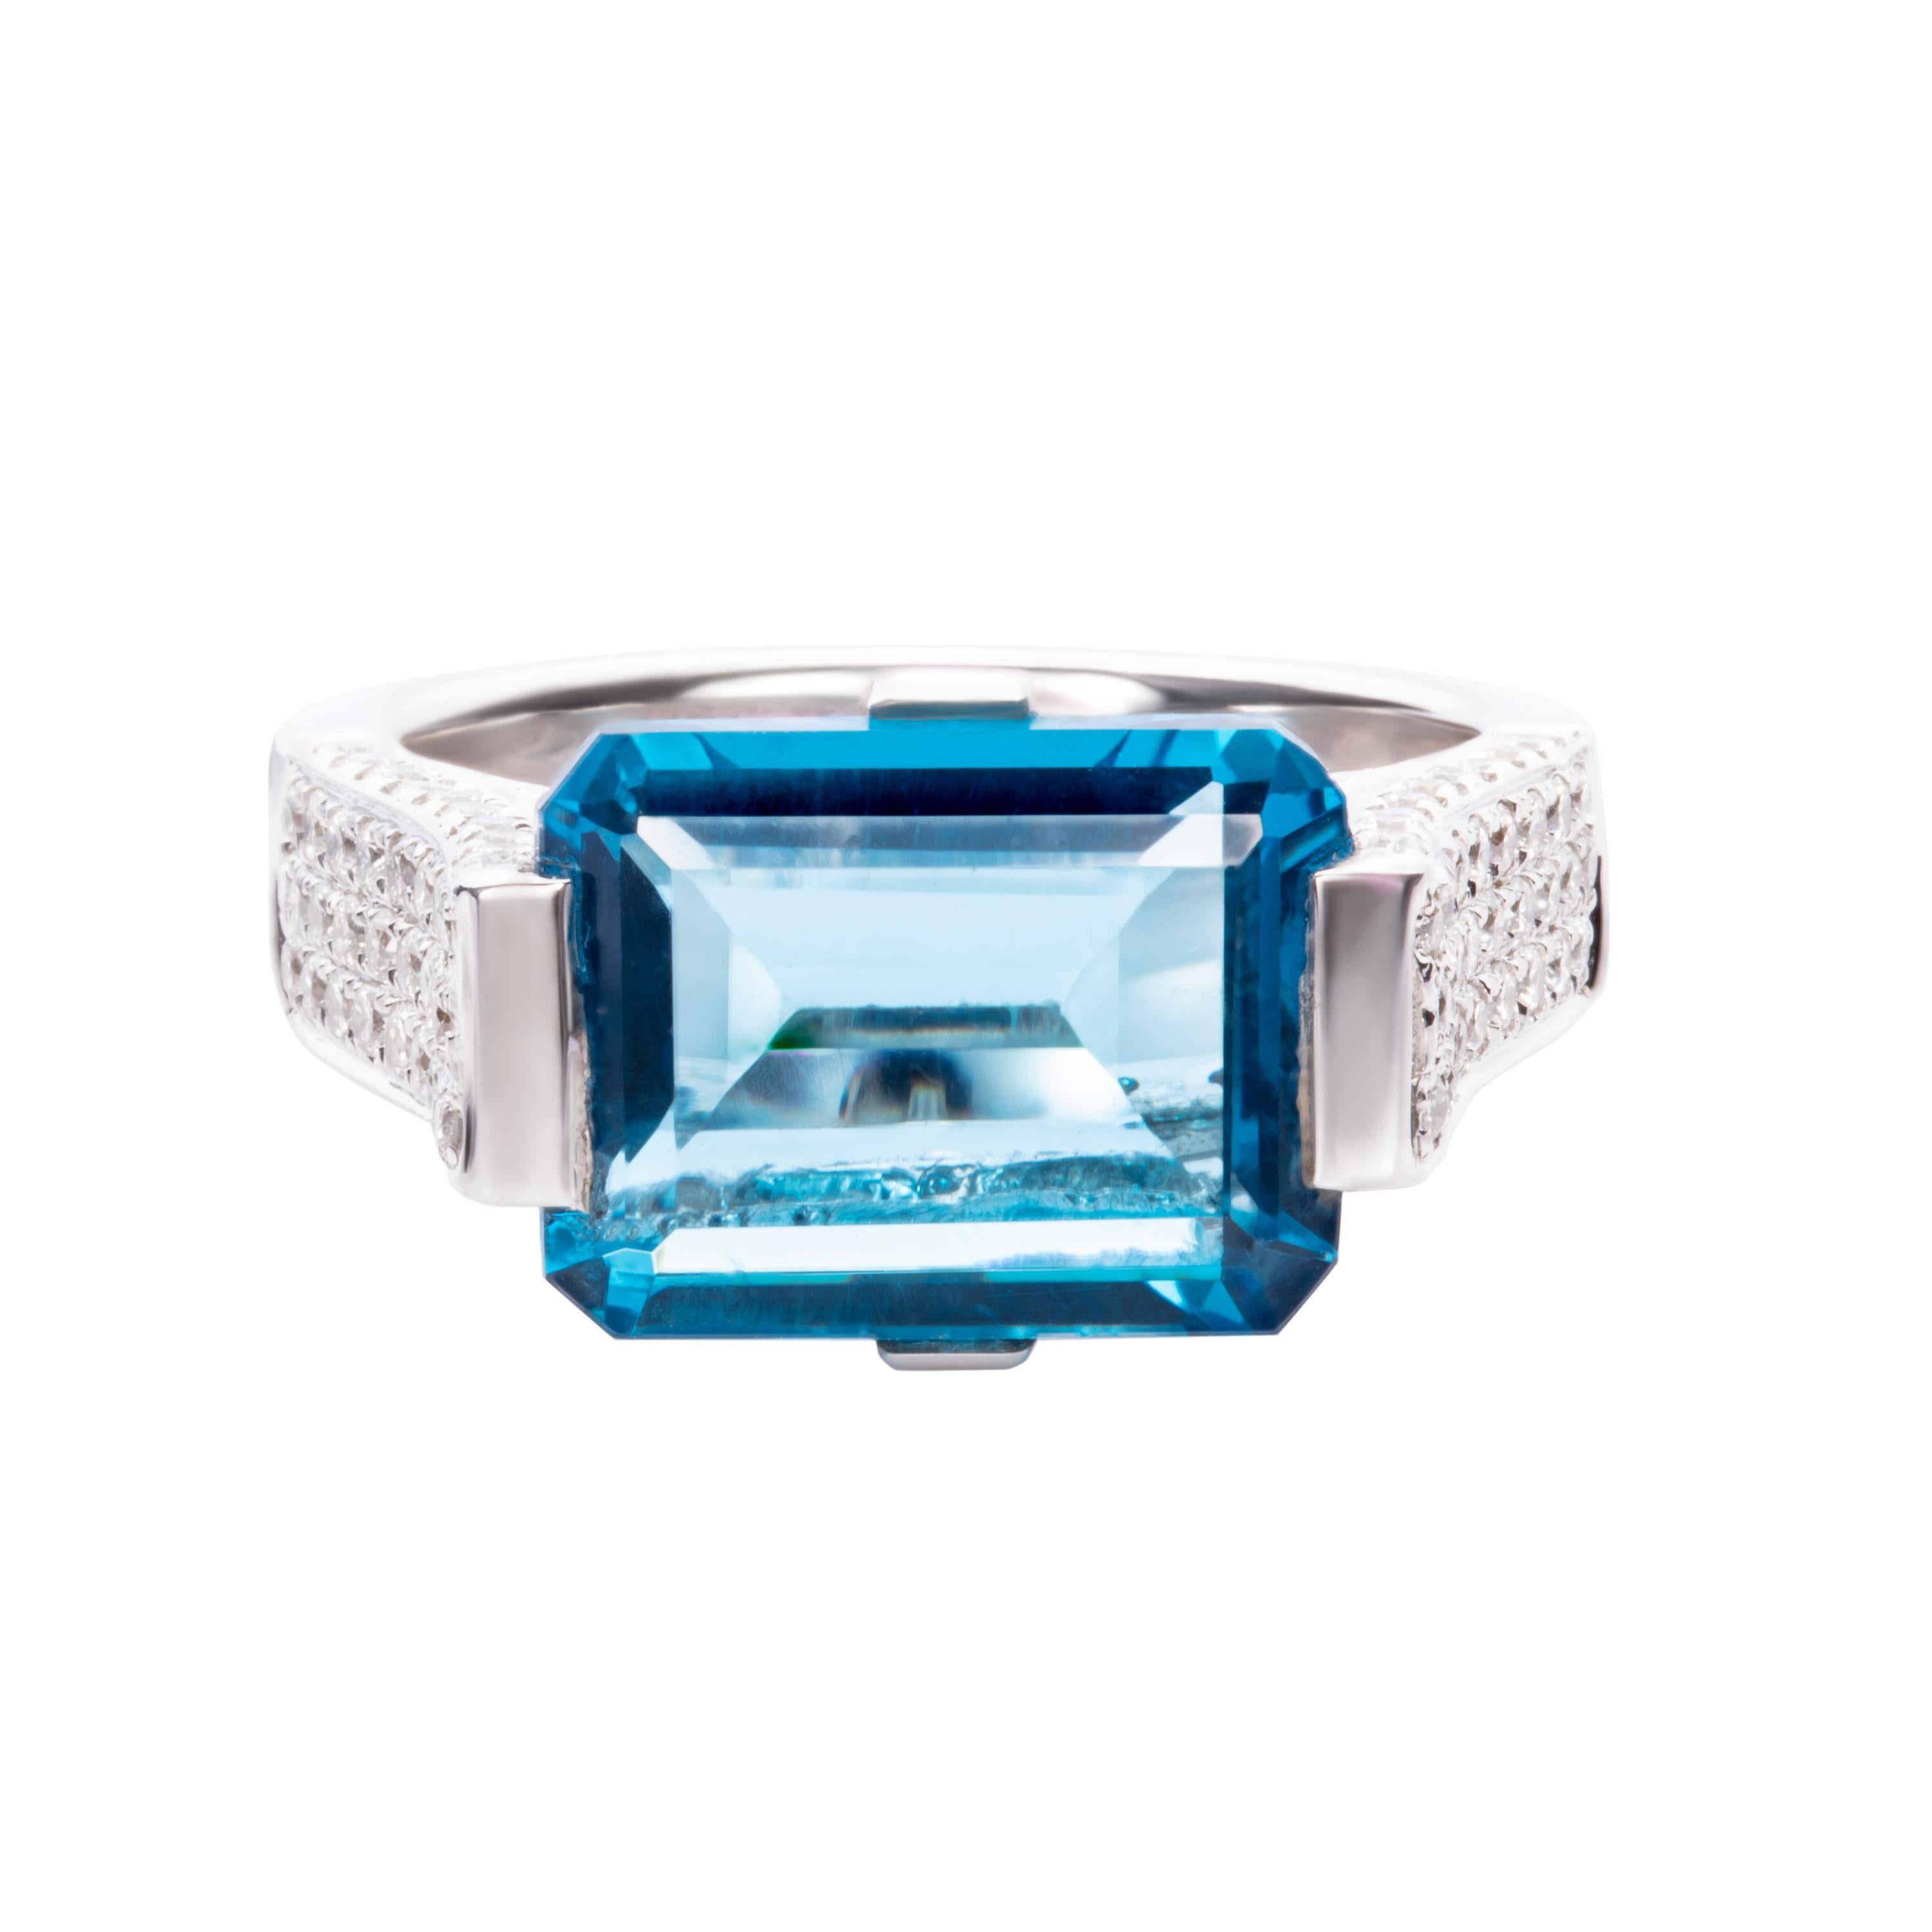 Rendered in lustrous 18-karat white gold, Butani's ring is centered with an unmissable 4.48 carat blue topaz surrounded by 0.98 carats of sparkling white diamonds.  Gift yours to a friend or loved one.  Currently a ring size US 7.  For other sizes,